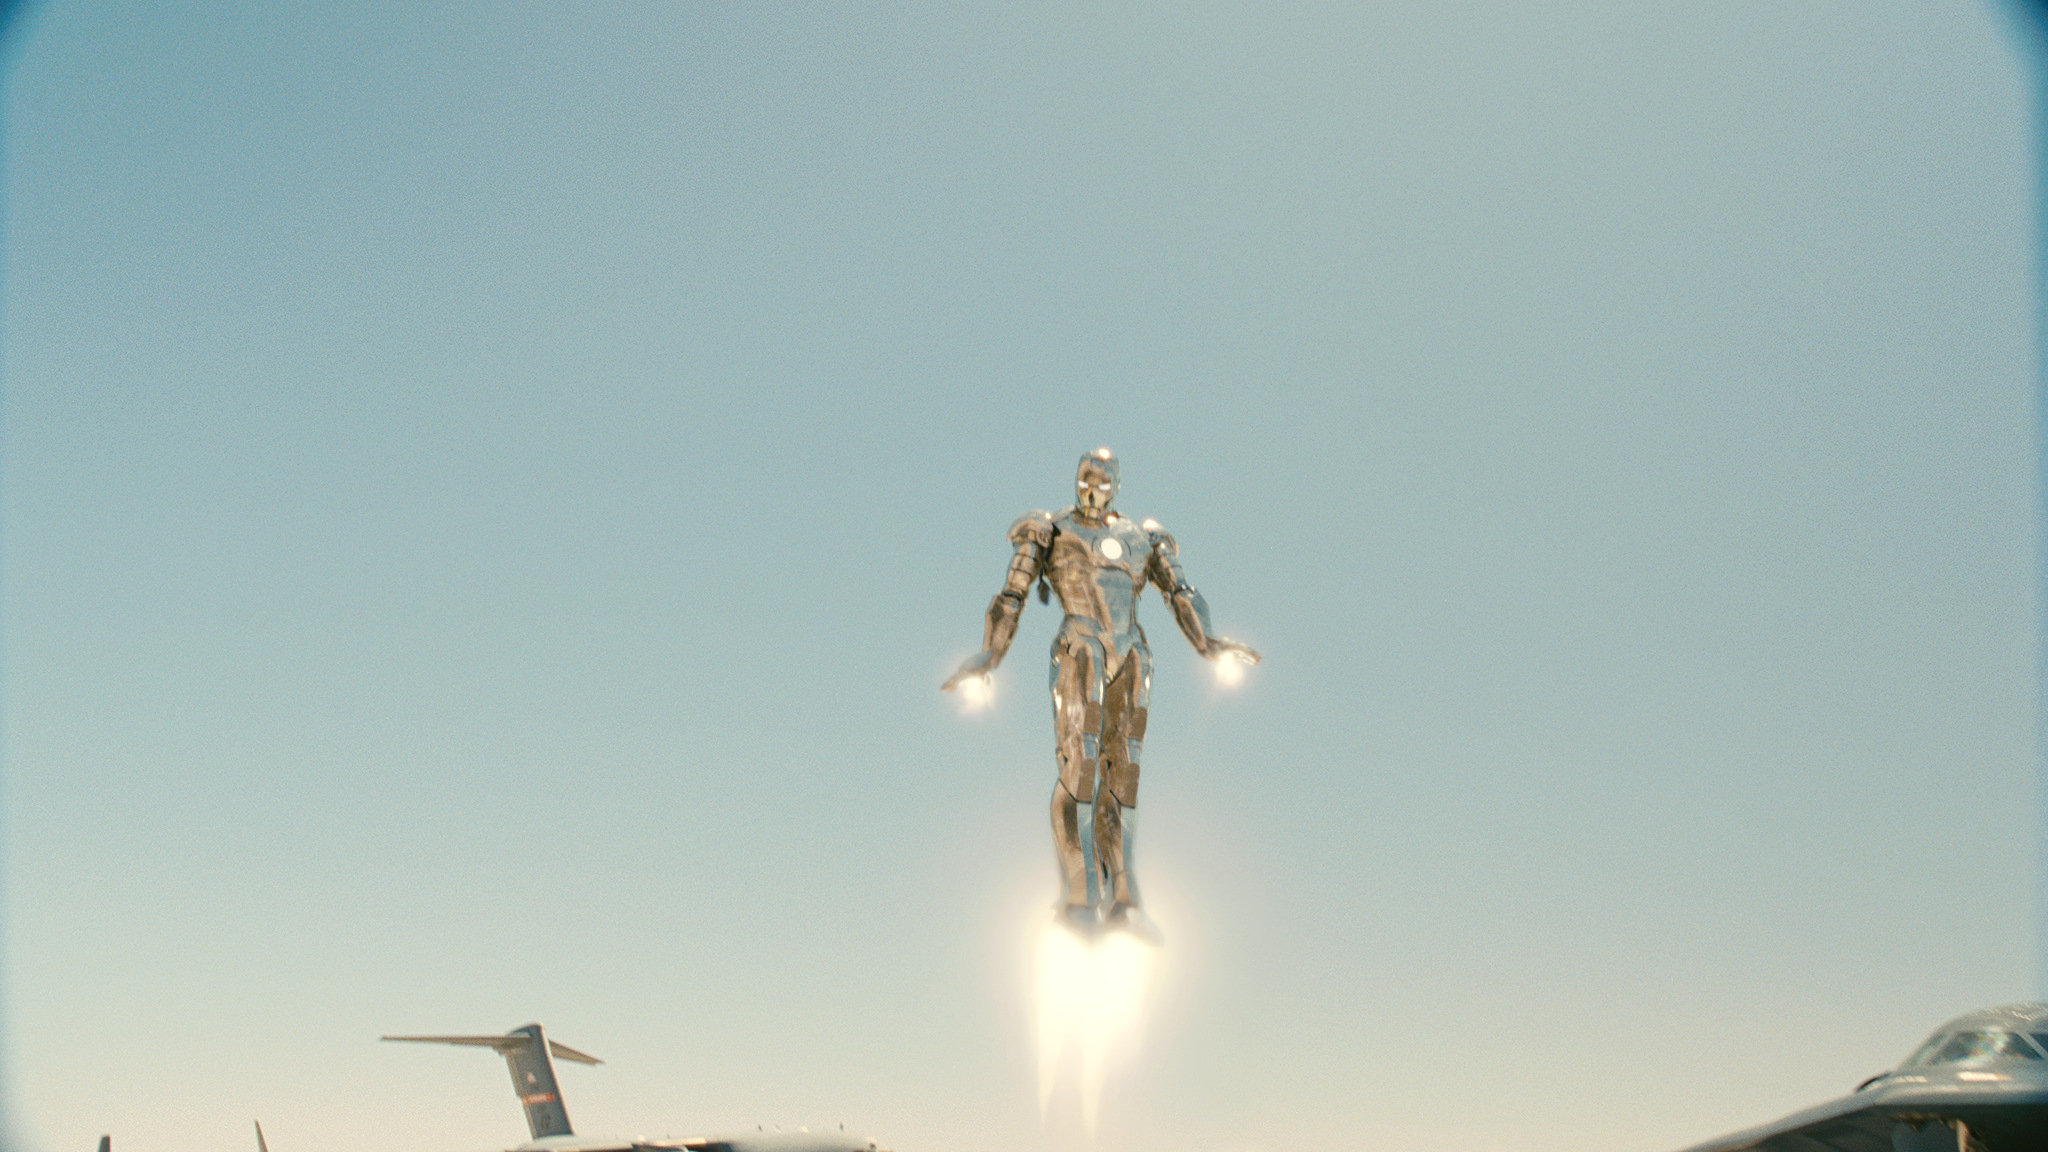 A scene from Paramount Pictures' Iron Man 2 (2010)